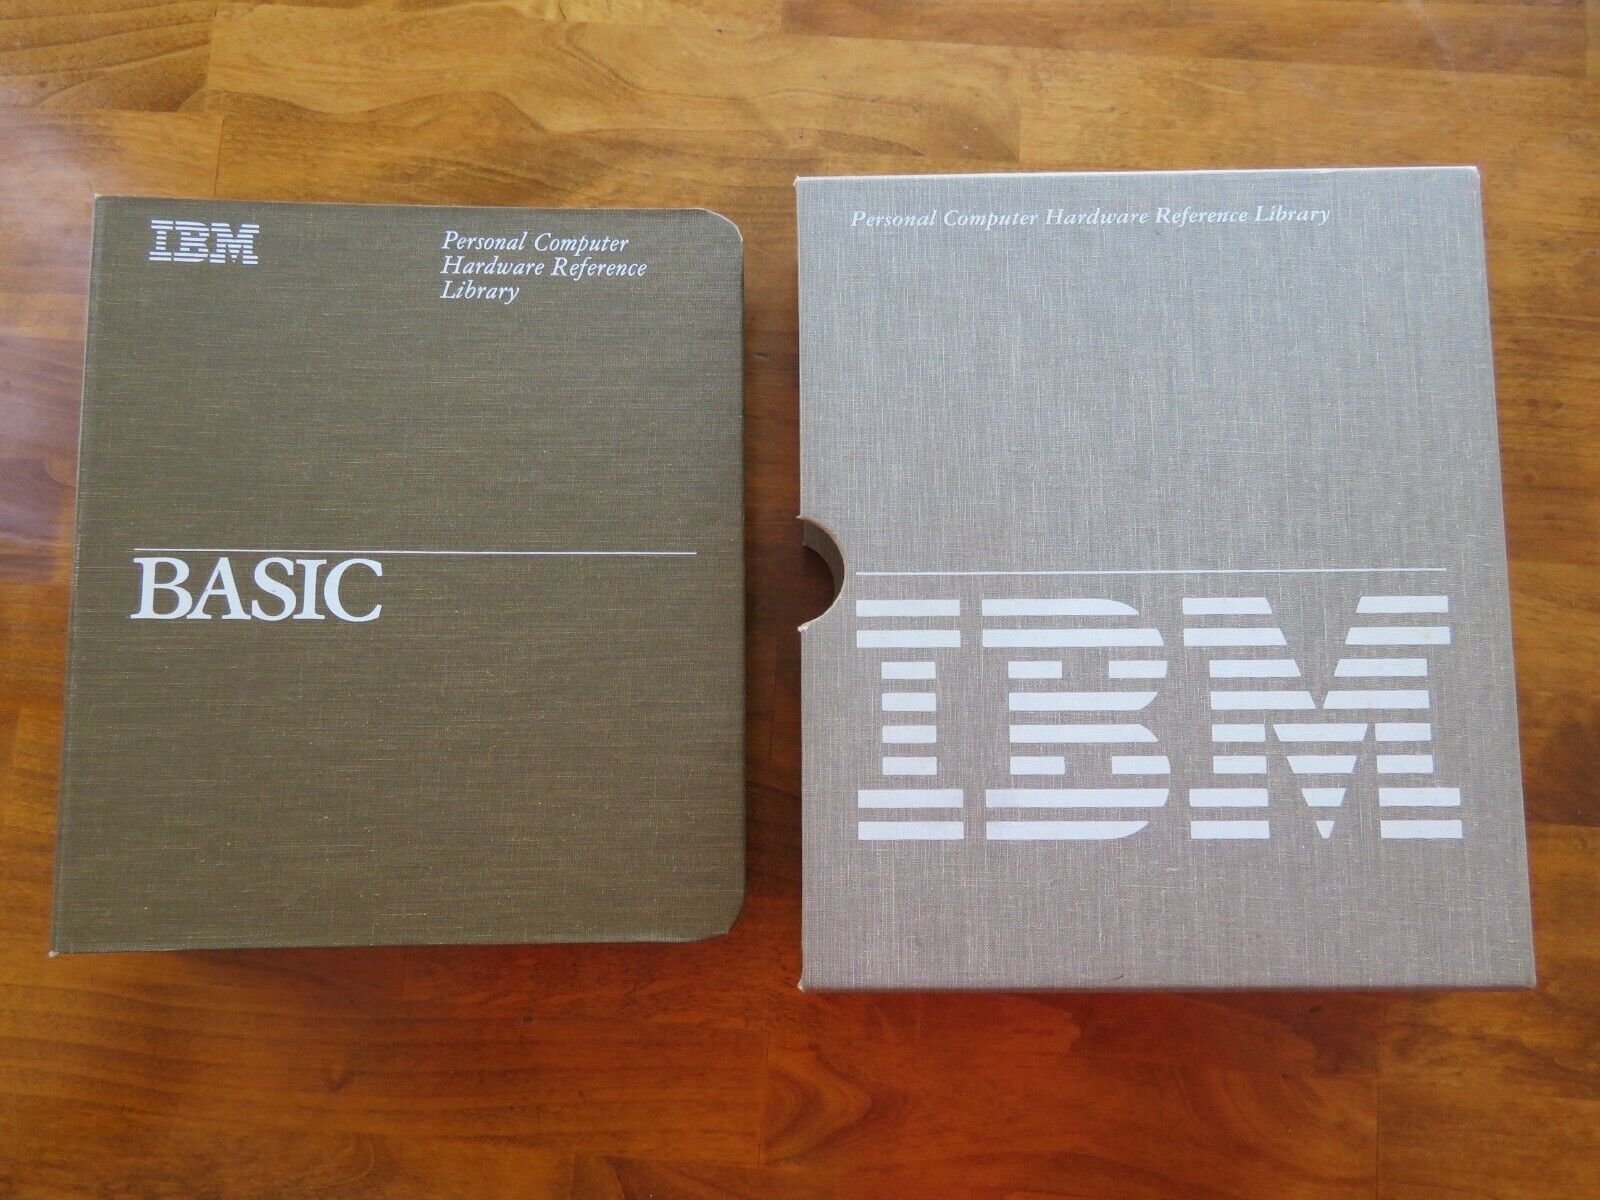 Microsoft IBM Personal Computer HARDWARE REFERENCE LIBRARY, BASIC PC 6361132